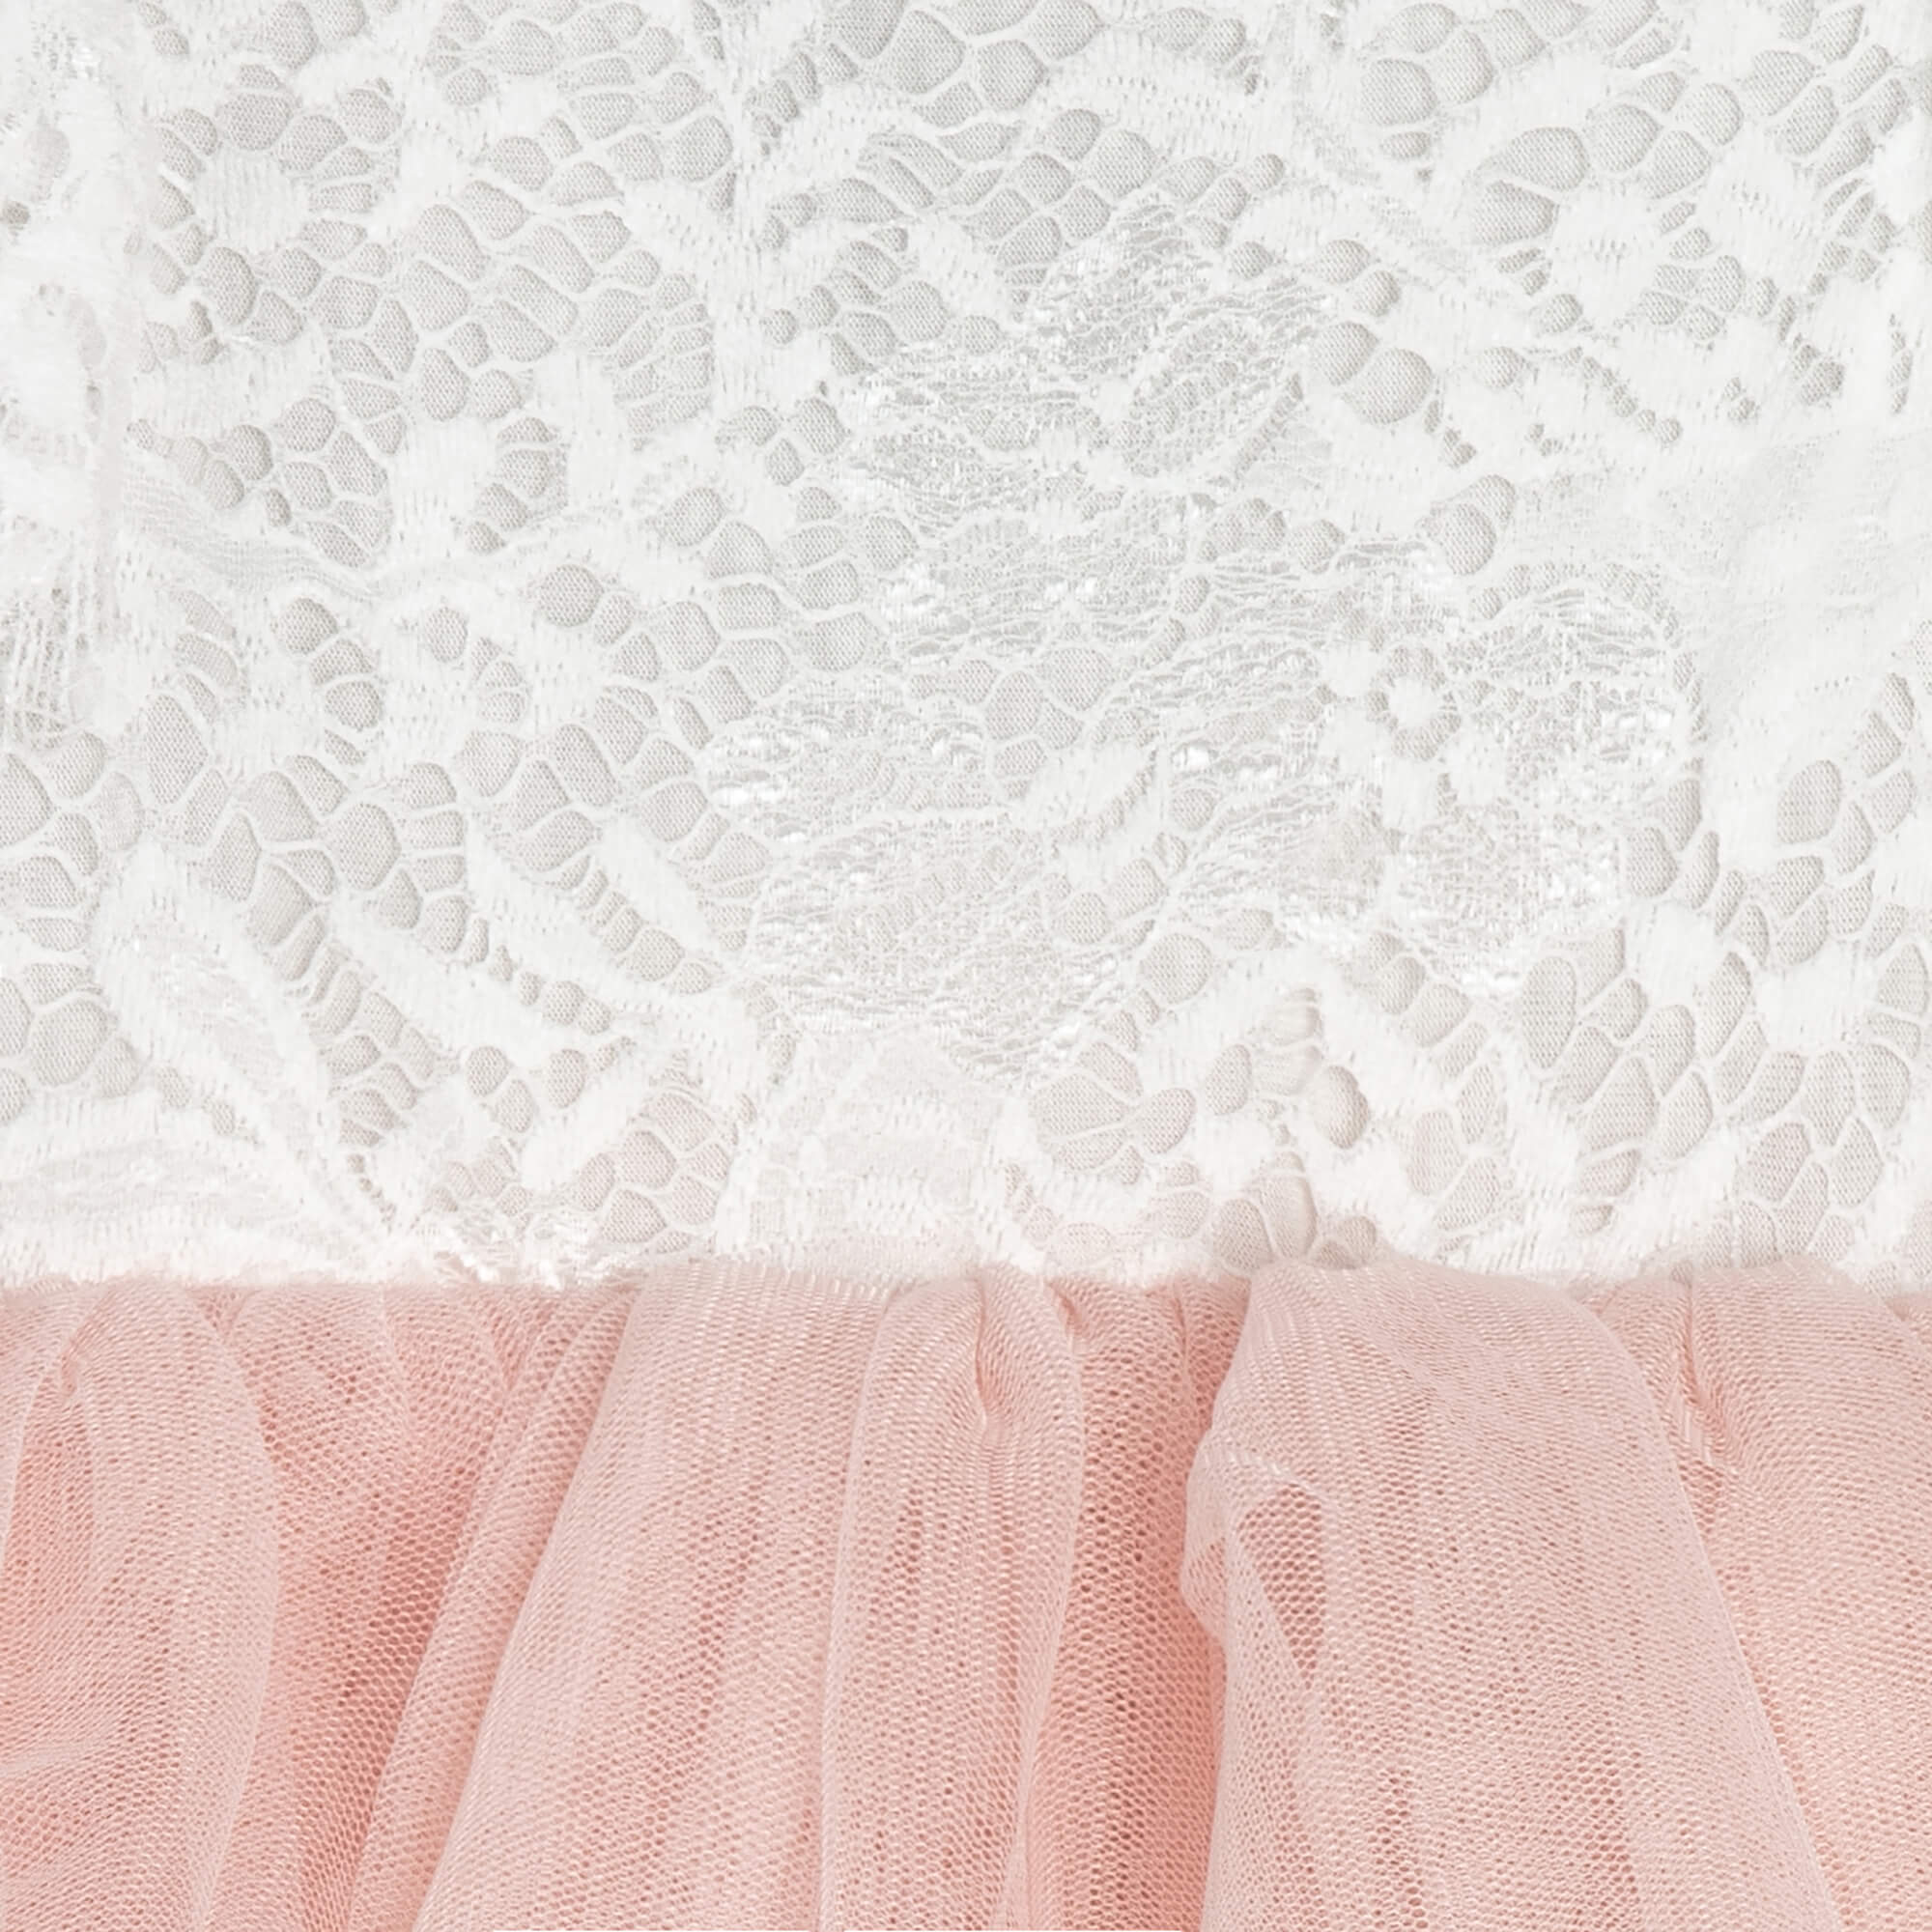 Close up of lace and blush tulle